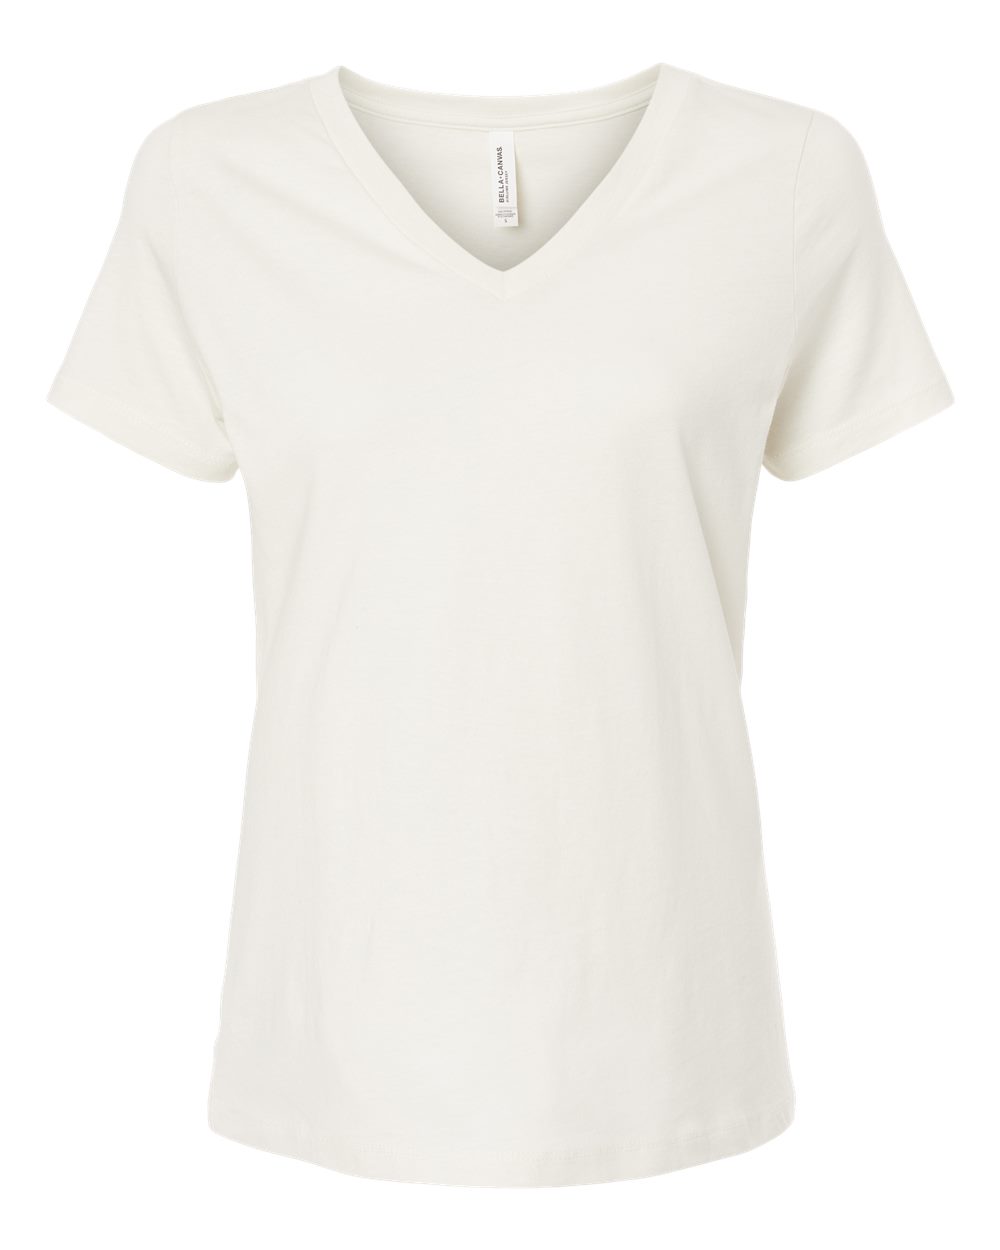 BELLA+CANVAS ® Women's Relaxed Jersey Short Sleeve V-Neck Tee. BC6405 – DFW  Impression